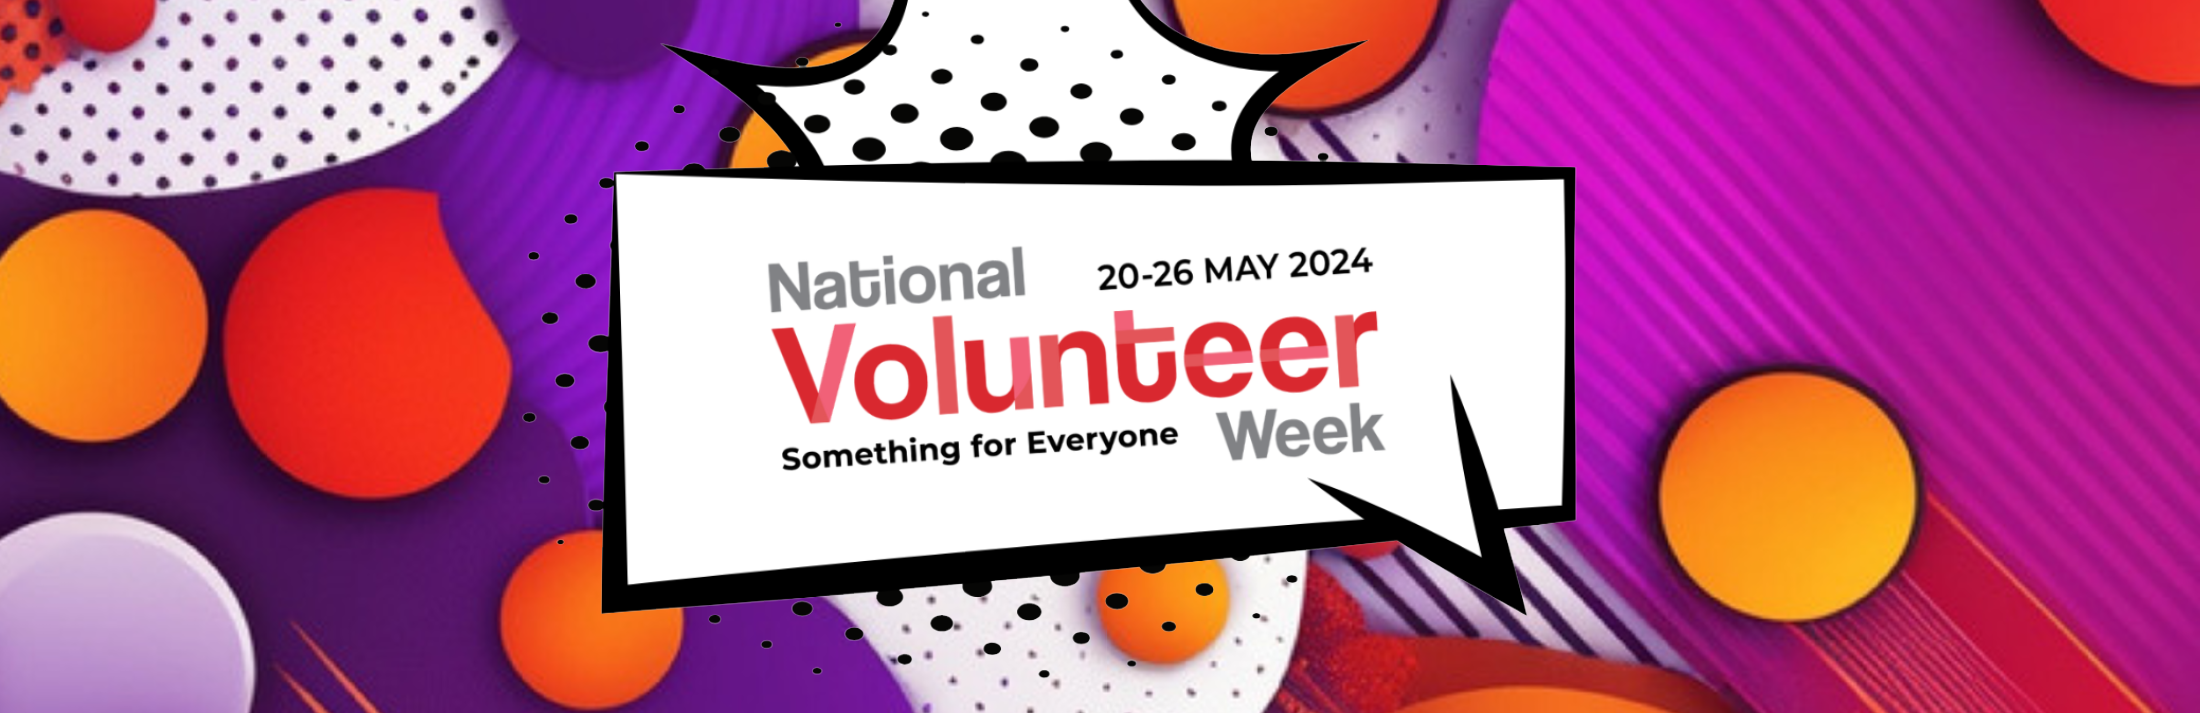 National volunteer week image with text something for everyone 20 to 26 May 2024